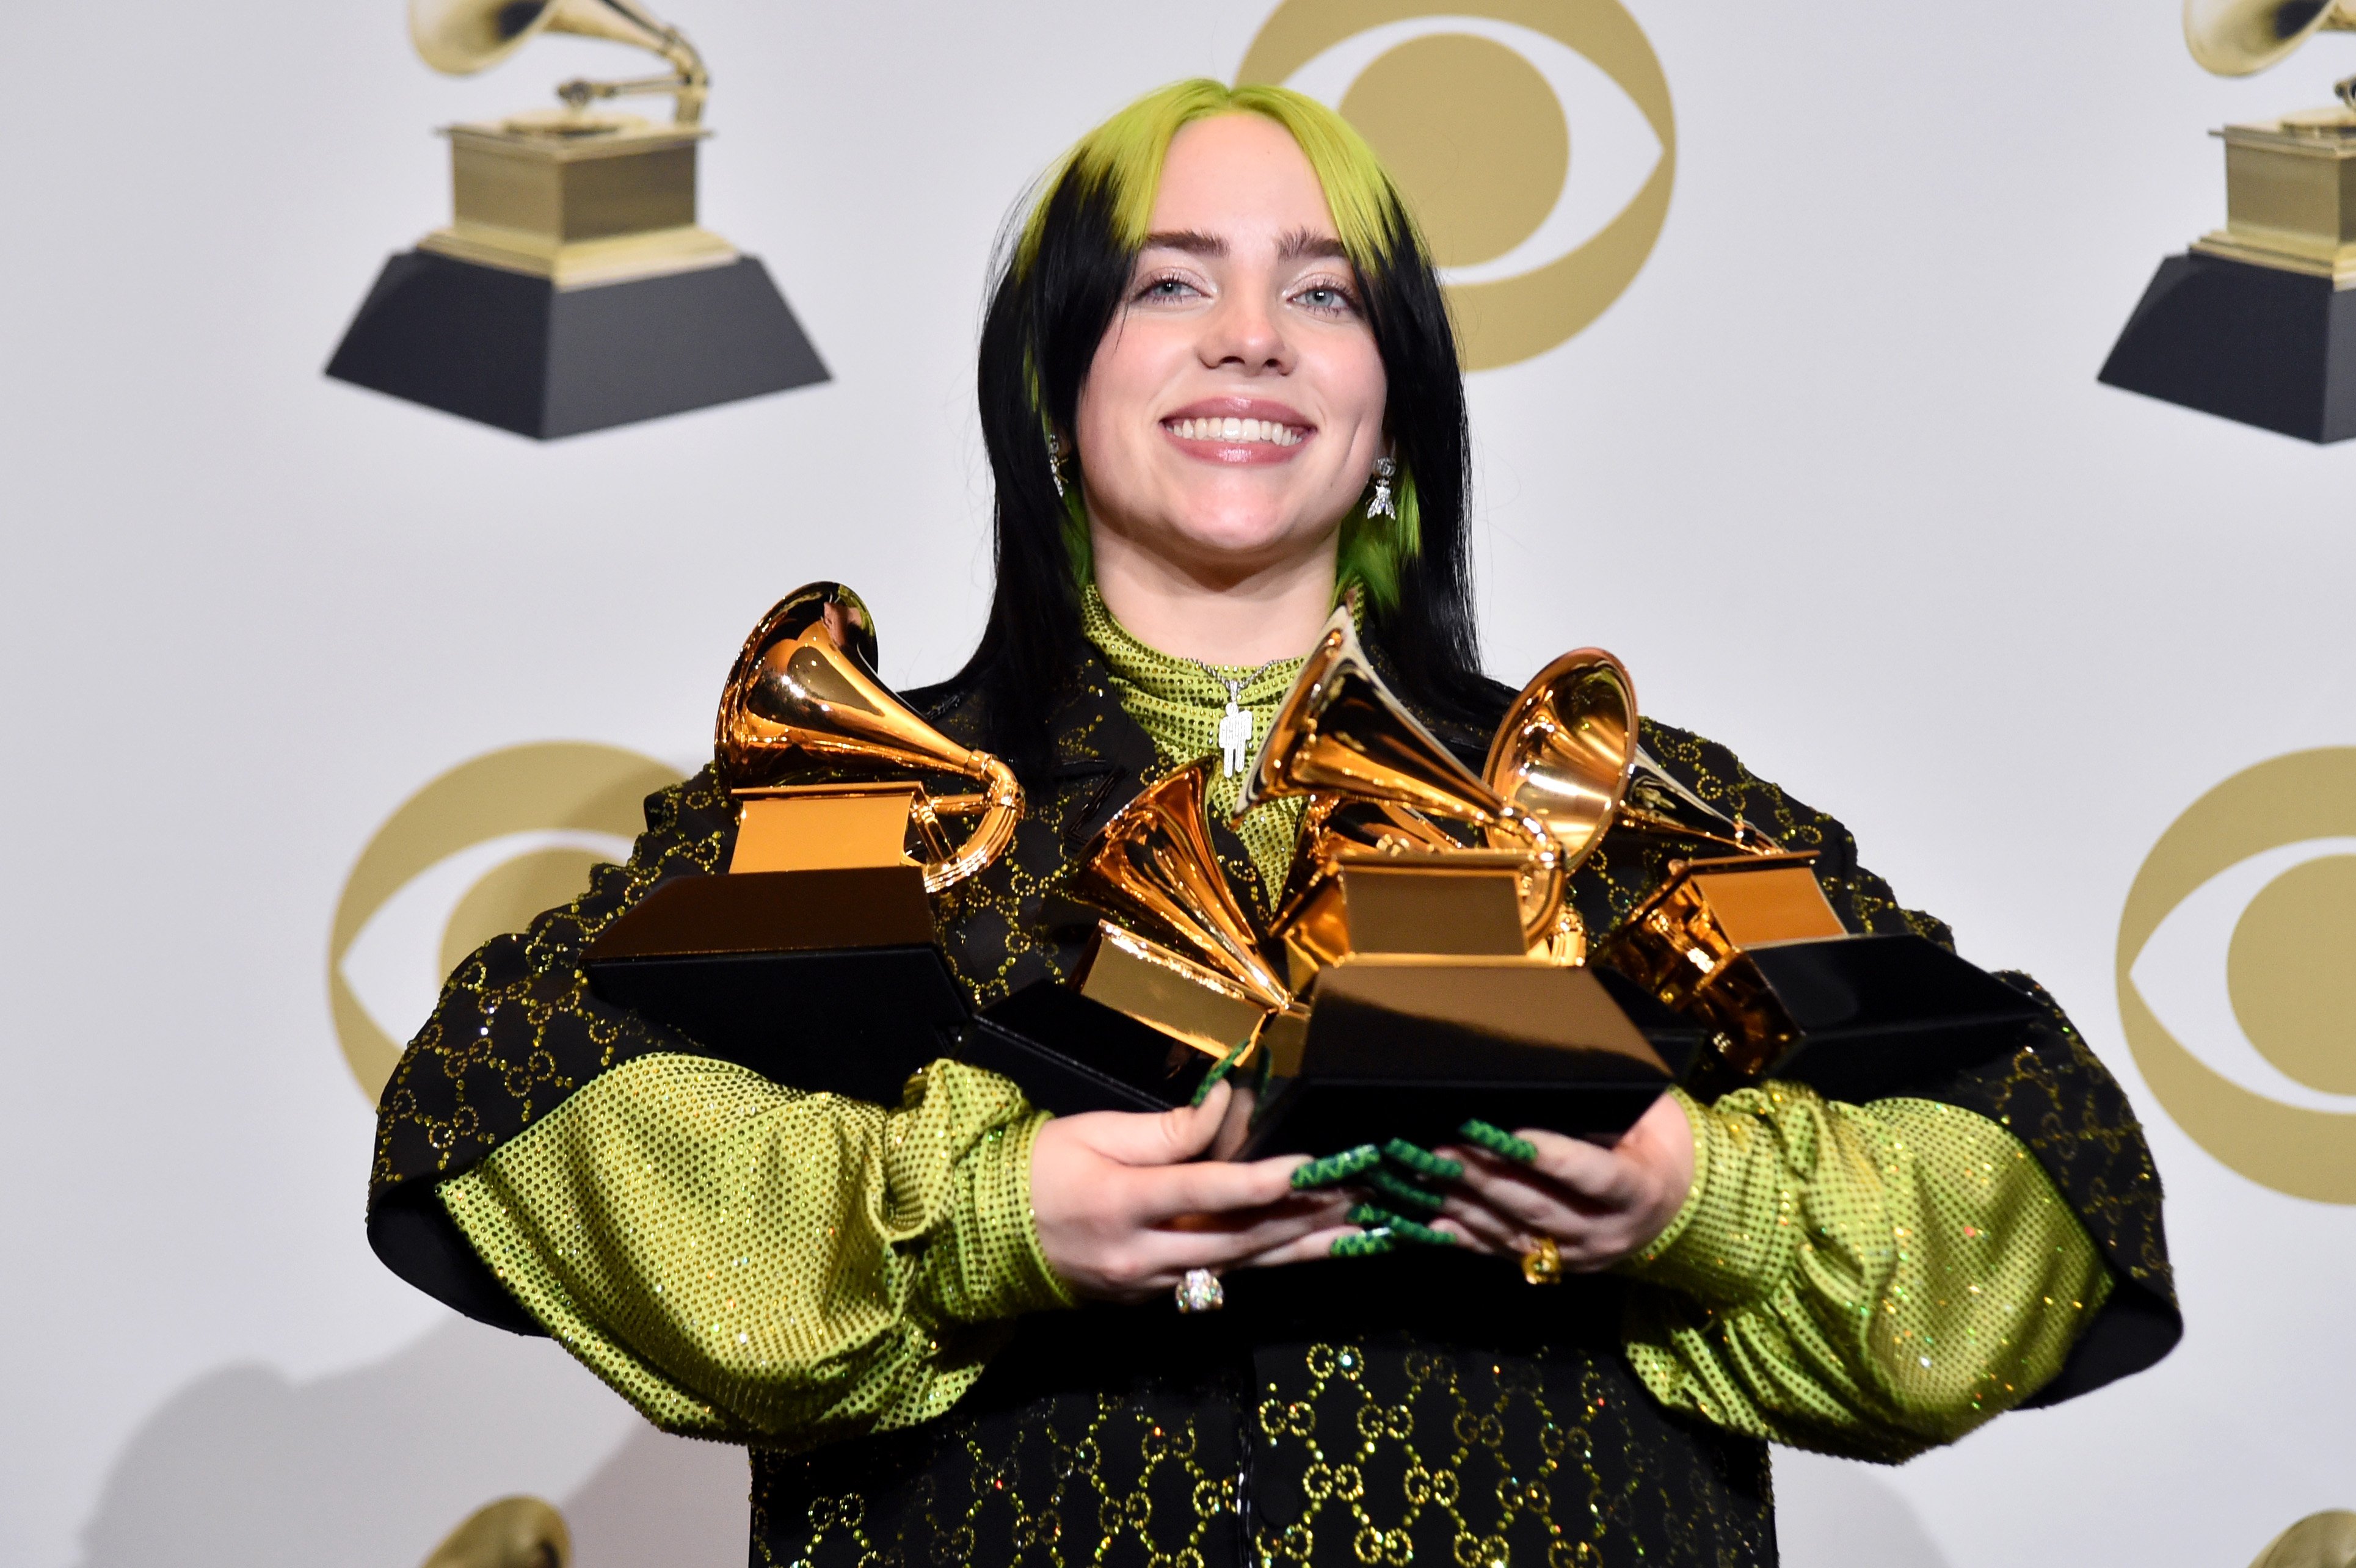 Billie Eilish during the 62nd Annual GRAMMY Awards at STAPLES Center on January 26, 2020 | Photo: GettyImages